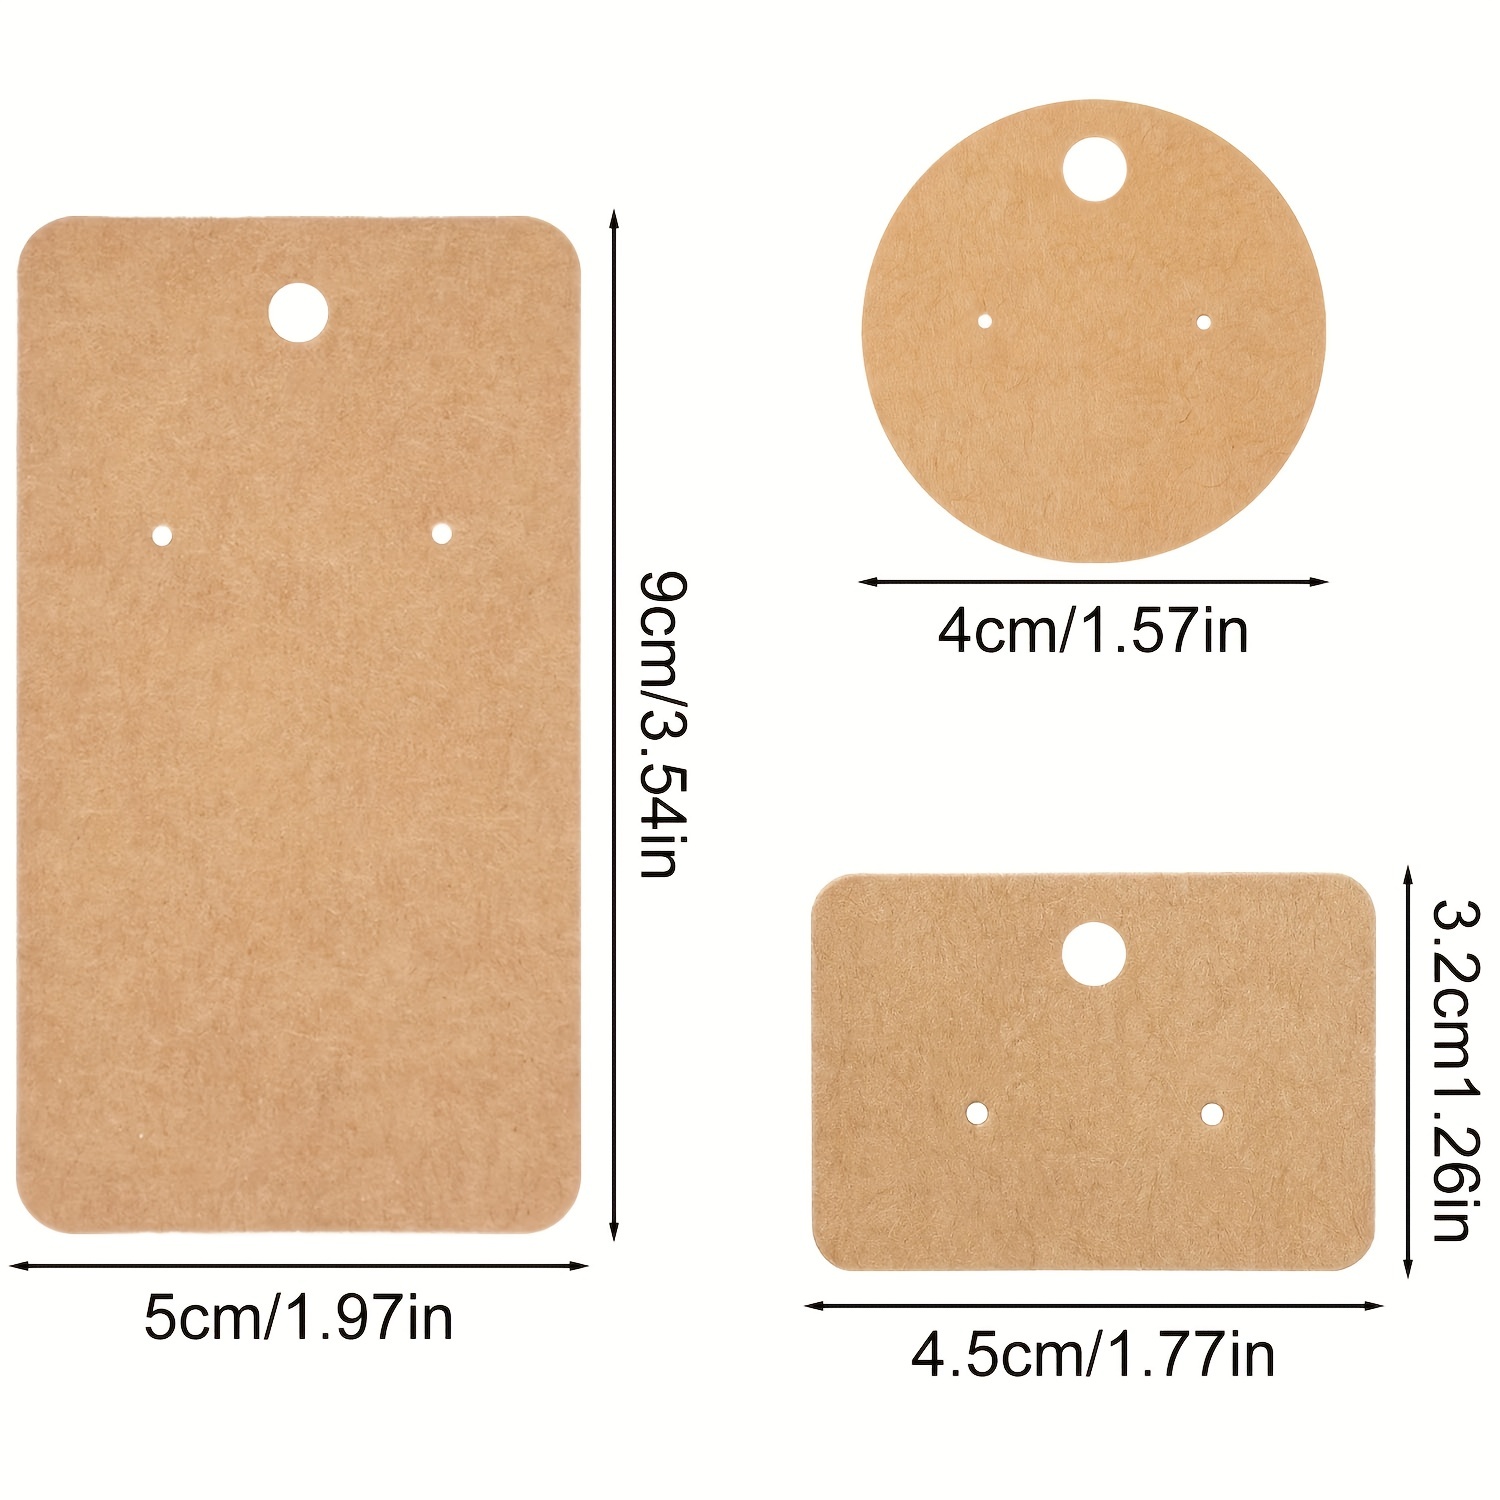 Lazydrop Earring Cards Necklace Display Cards with Bags 150 Earring Display Cards 150 Pcs Self-Seal Bags Kraft Paper Tags for DIY Ear Studs(Brown)